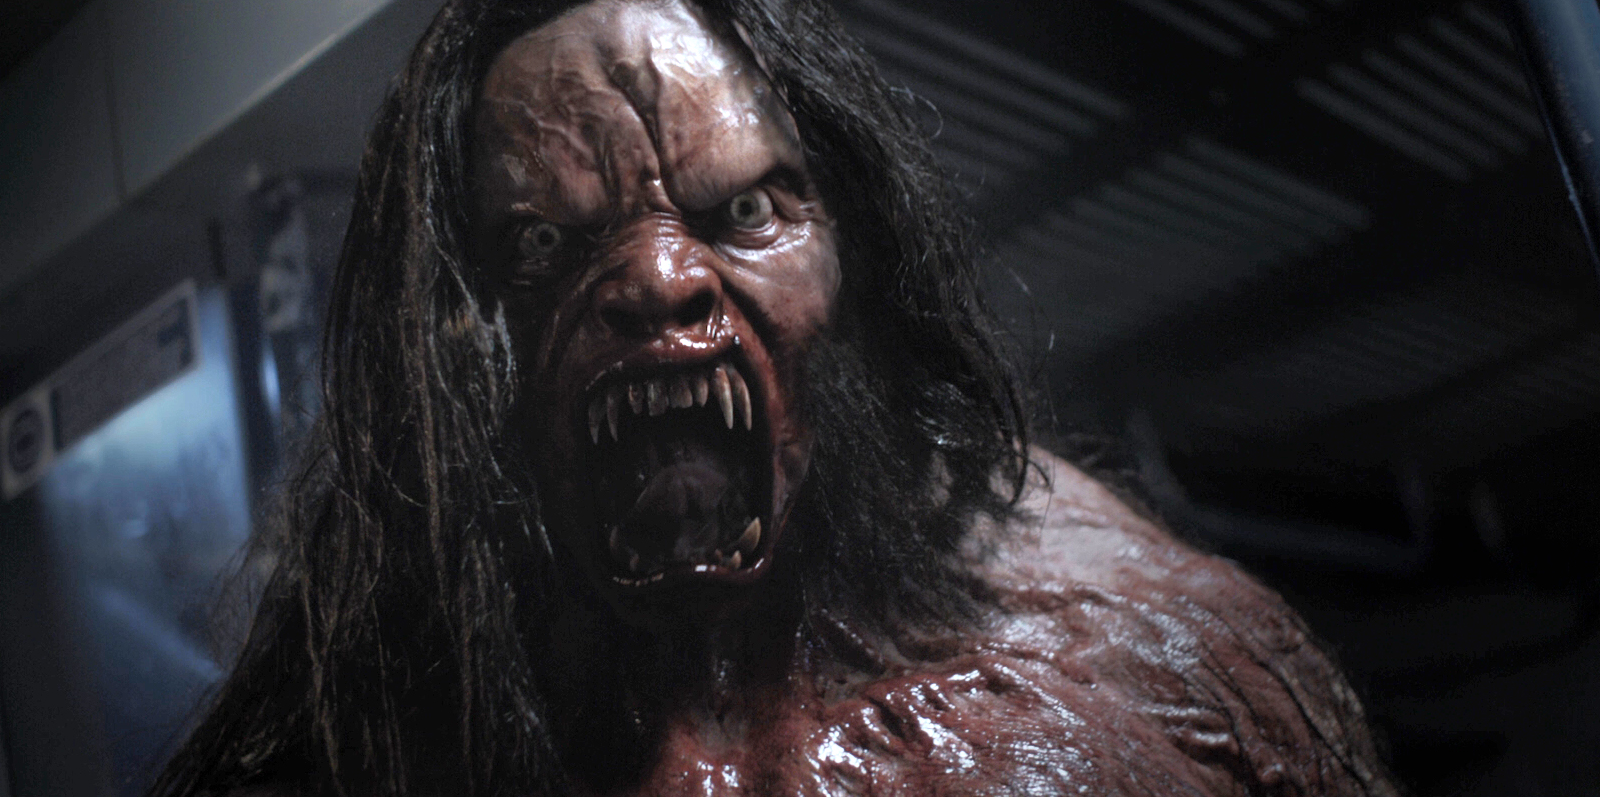 Howl - Vicious 2015 Horror Movie Is Train to Busan With Werewolves picture